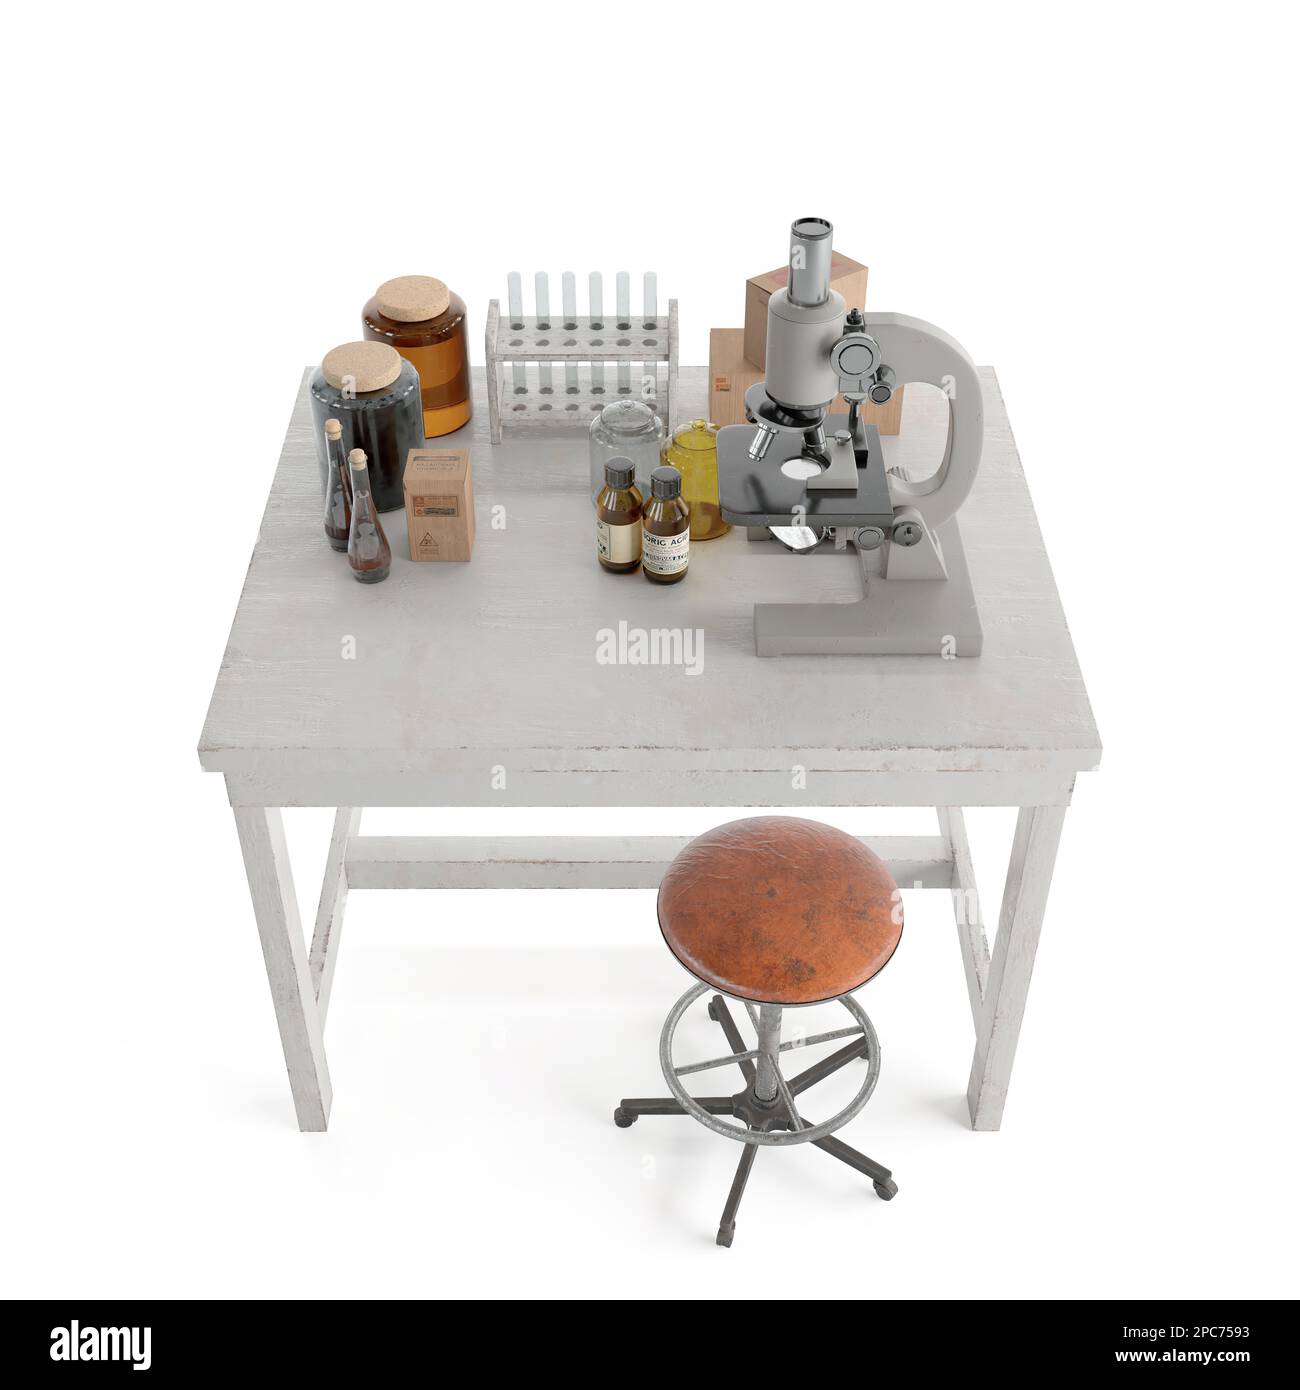 Desk with lab equipment 3D rendering, scientific workplace setup Stock Photo